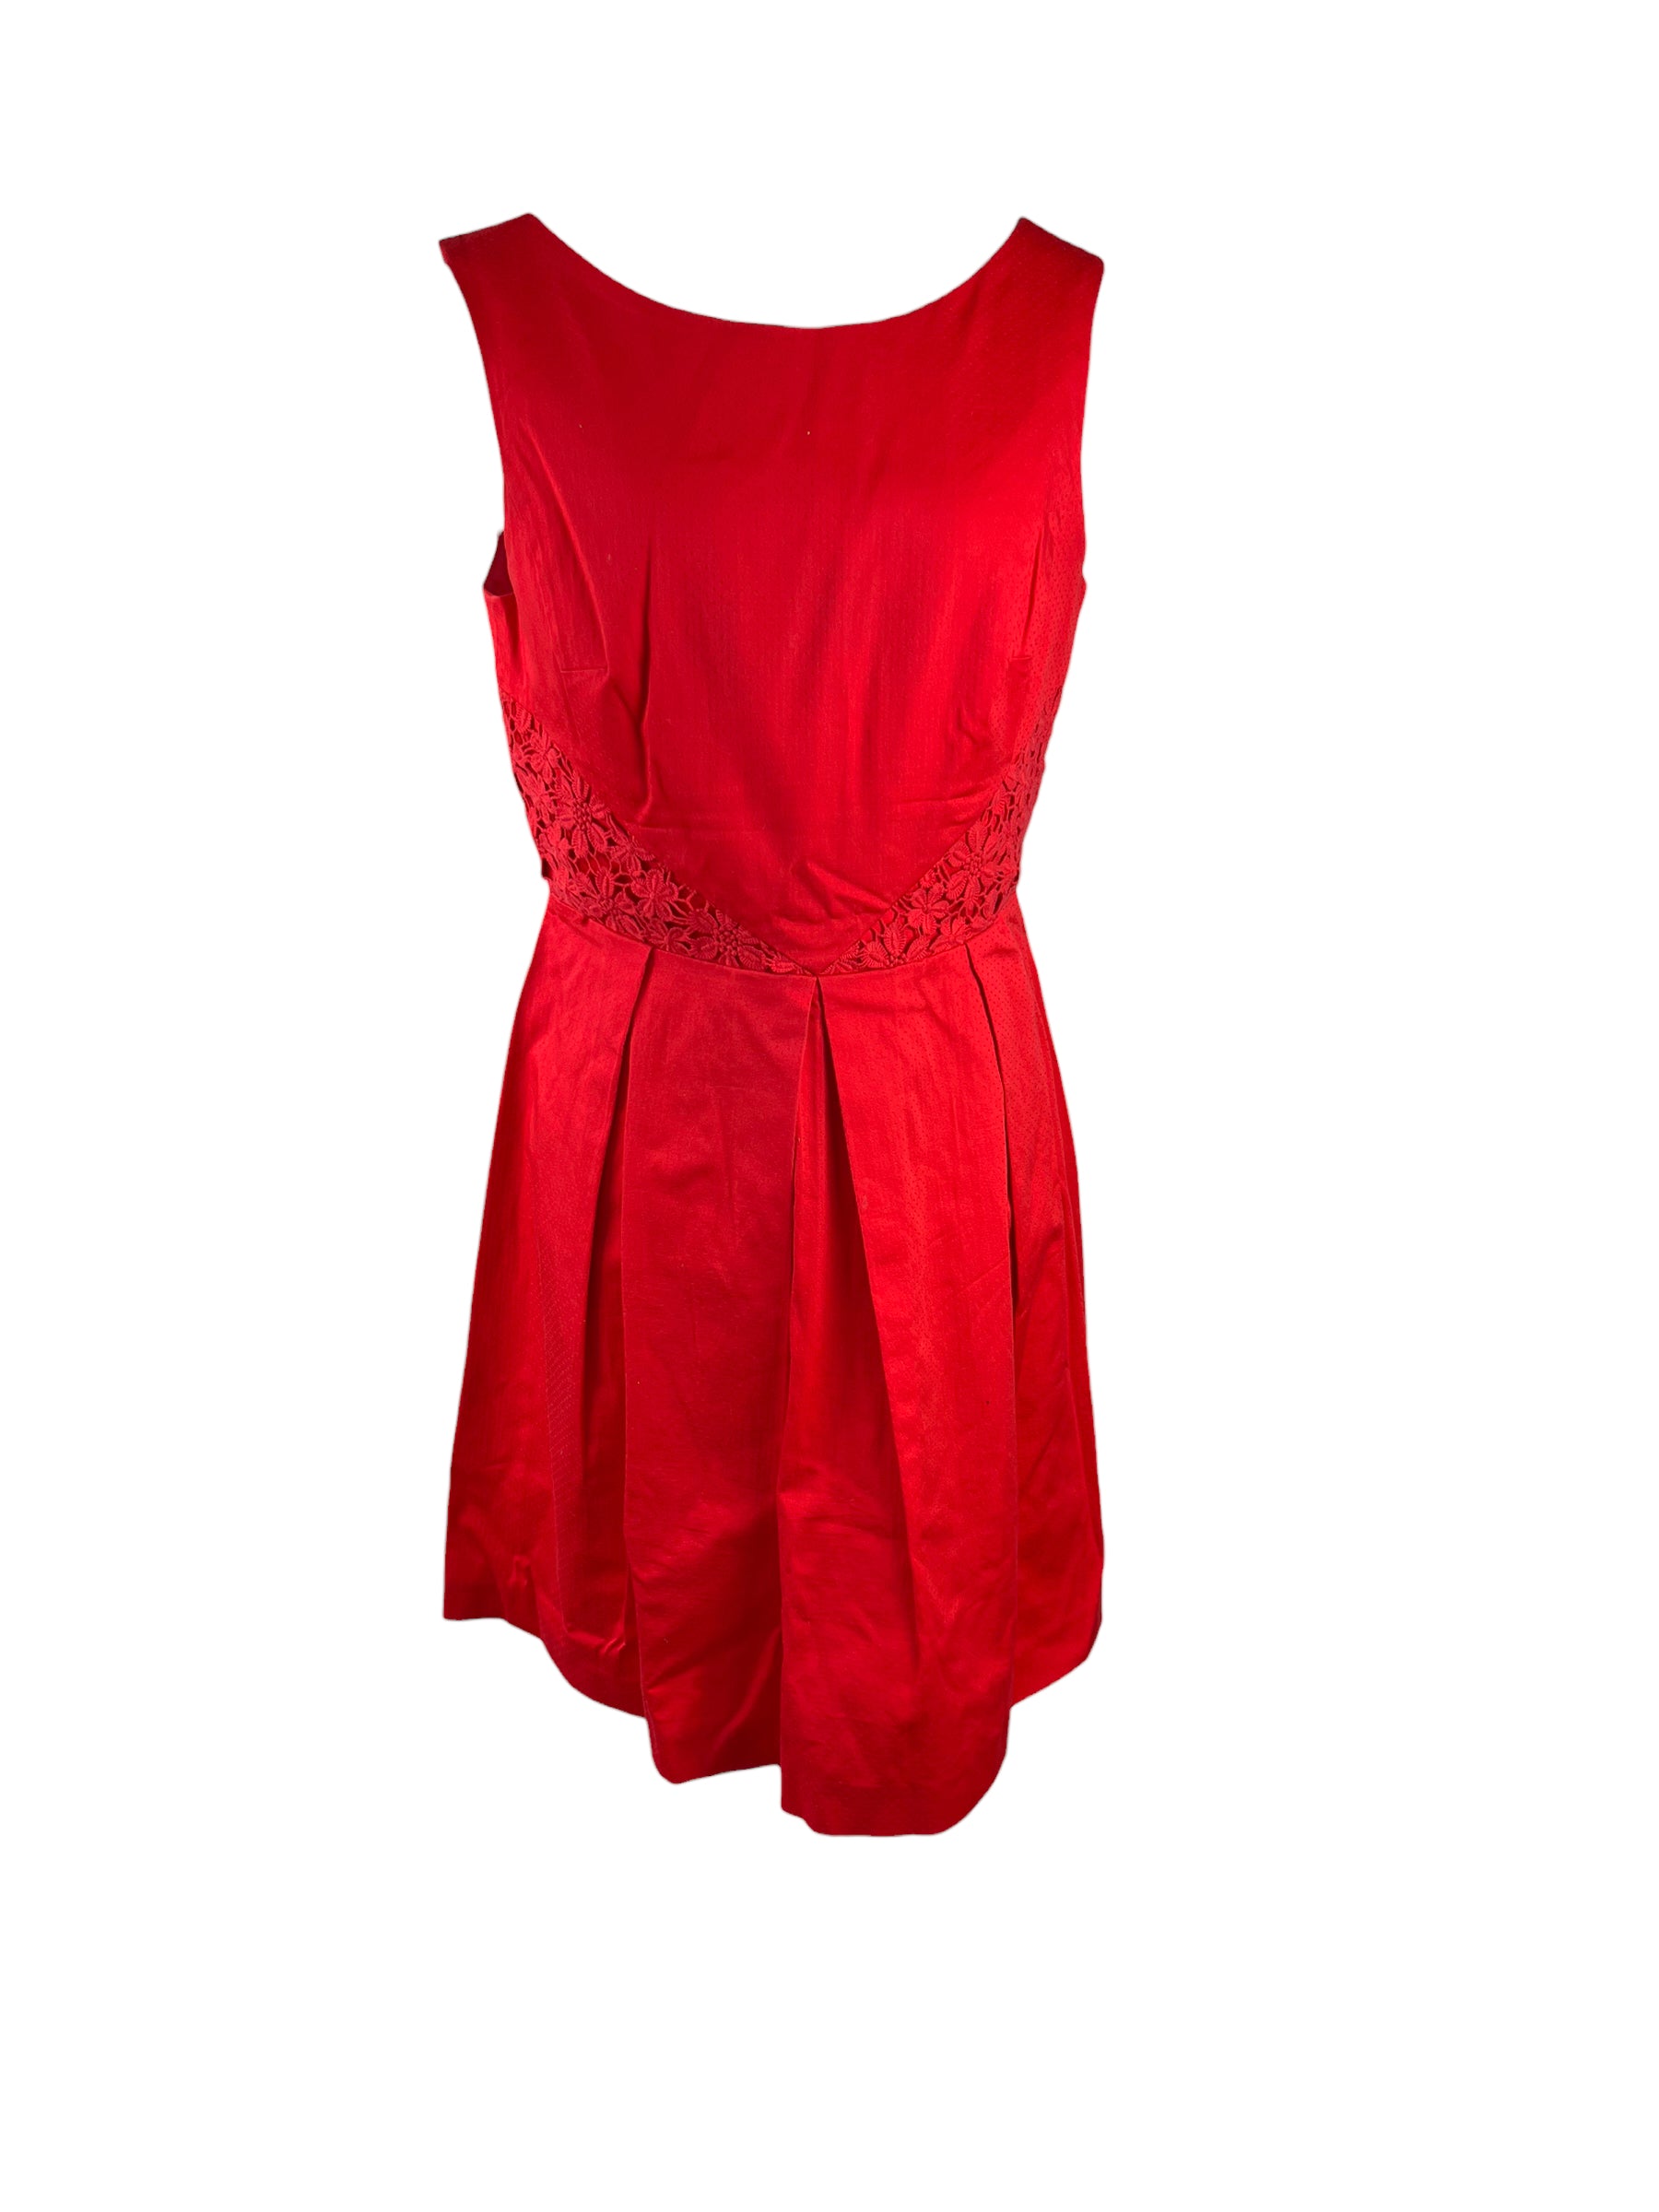 Red Solid Ponte Dress by Nicole Miller for $40